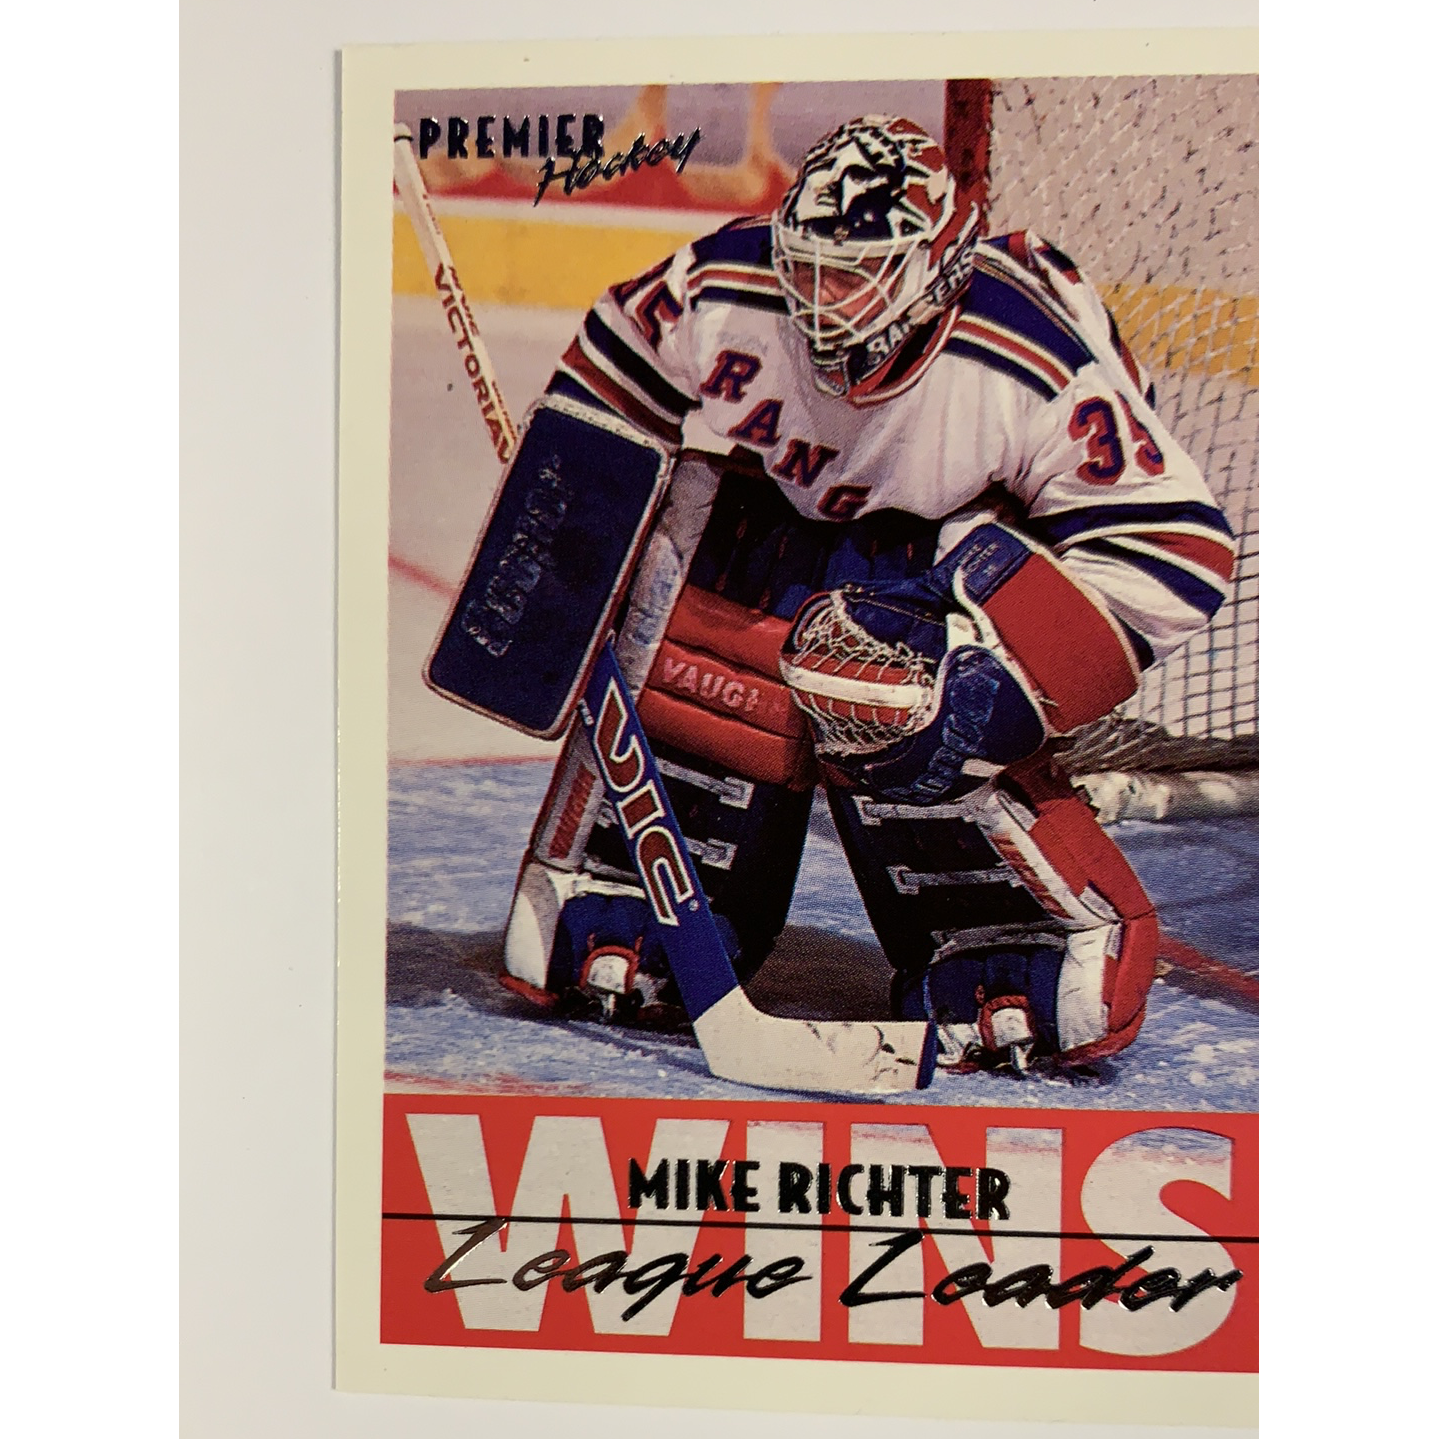  1994 Topps Mike Richter Wins Leader  Local Legends Cards & Collectibles